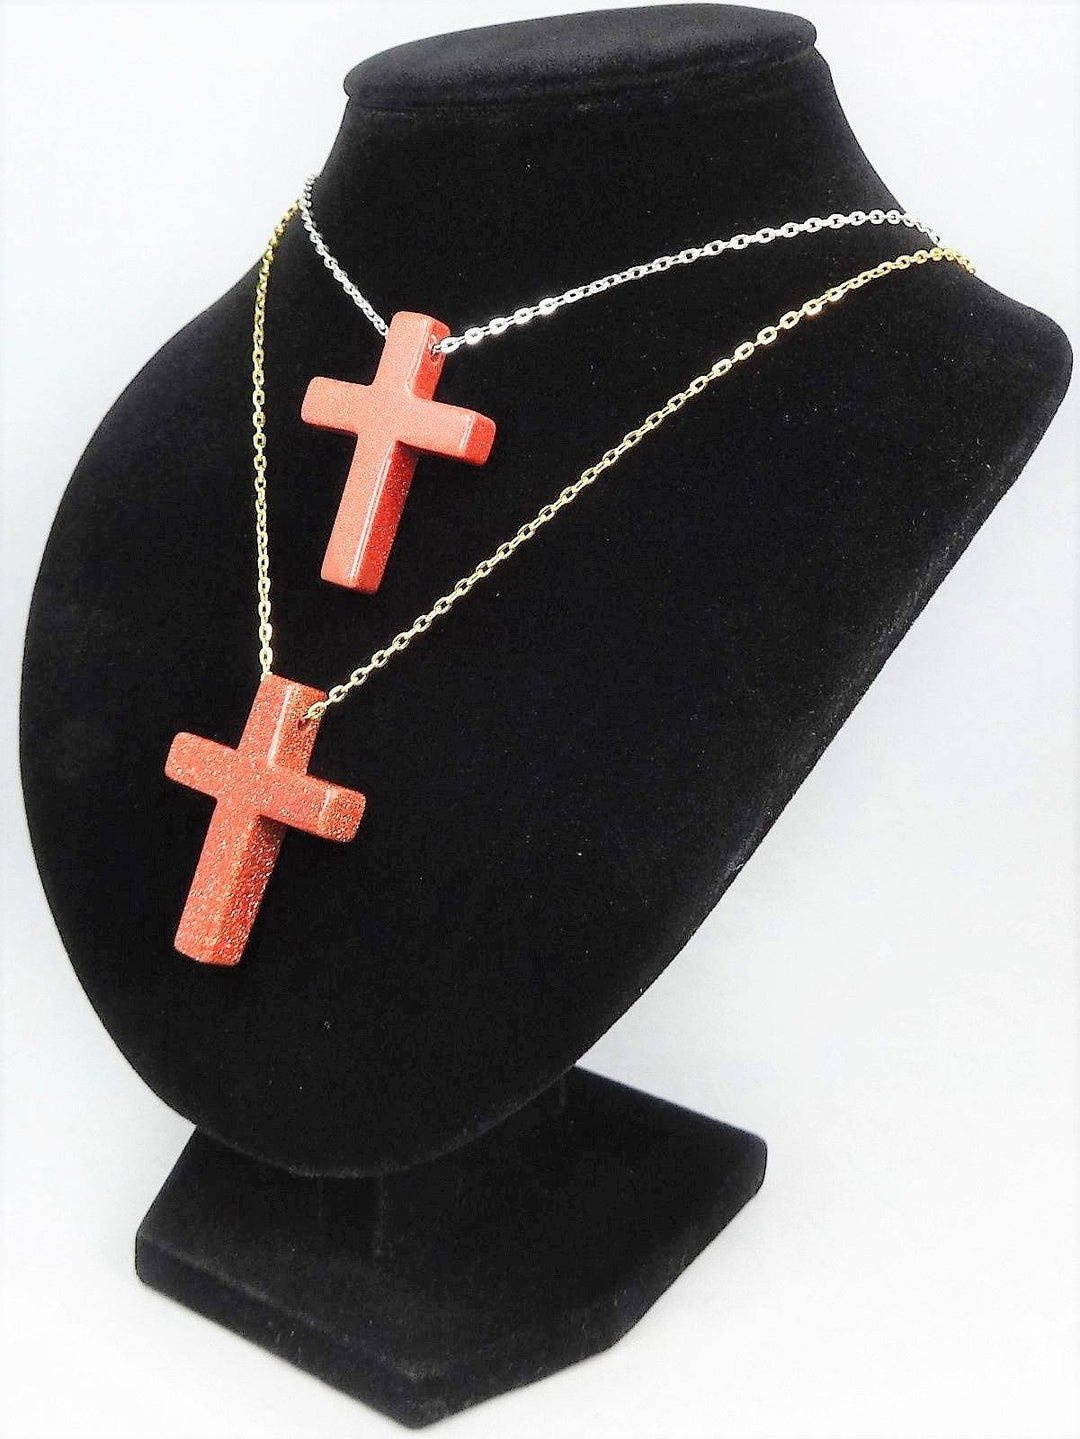 Cross Necklace - Large Red Goldstone Pendant - 2mm Drilled Gemstone Bead - Colored Glass Beads (Z21) Spiritual Polished Stones Faith Charm